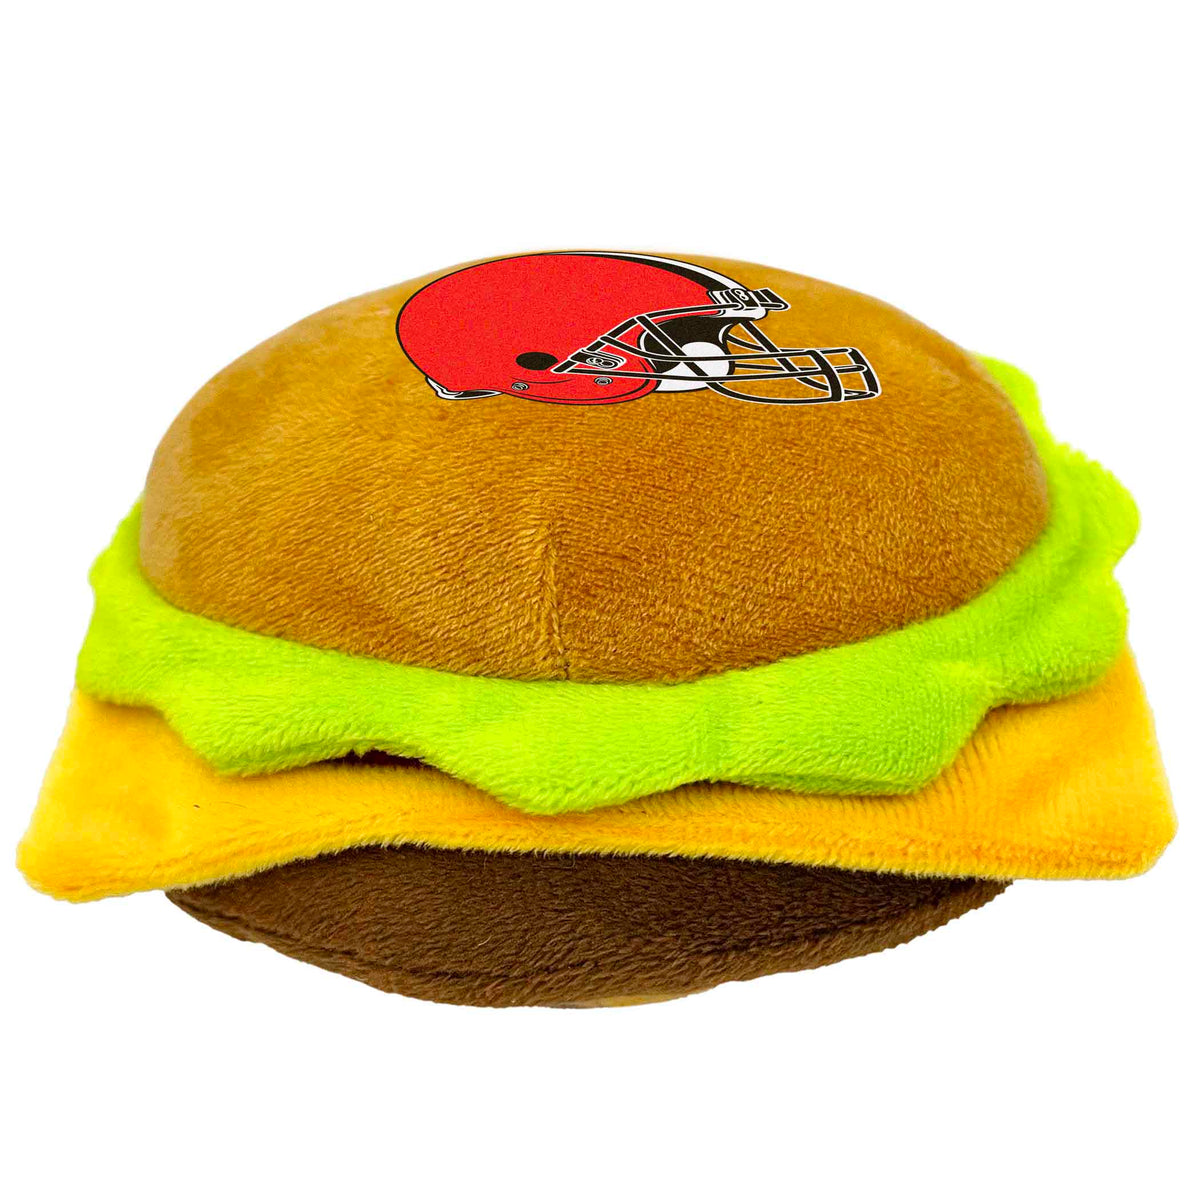 Cleveland Browns Hamburger Plush Toys - 3 Red Rovers